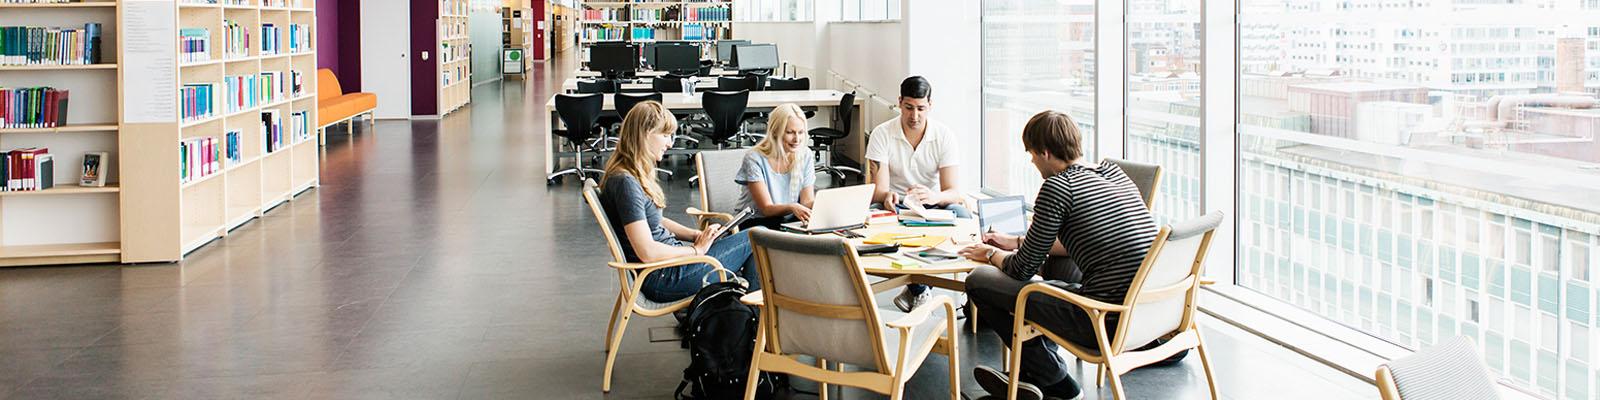 Image of college students with laptops and books working together in a modern library.